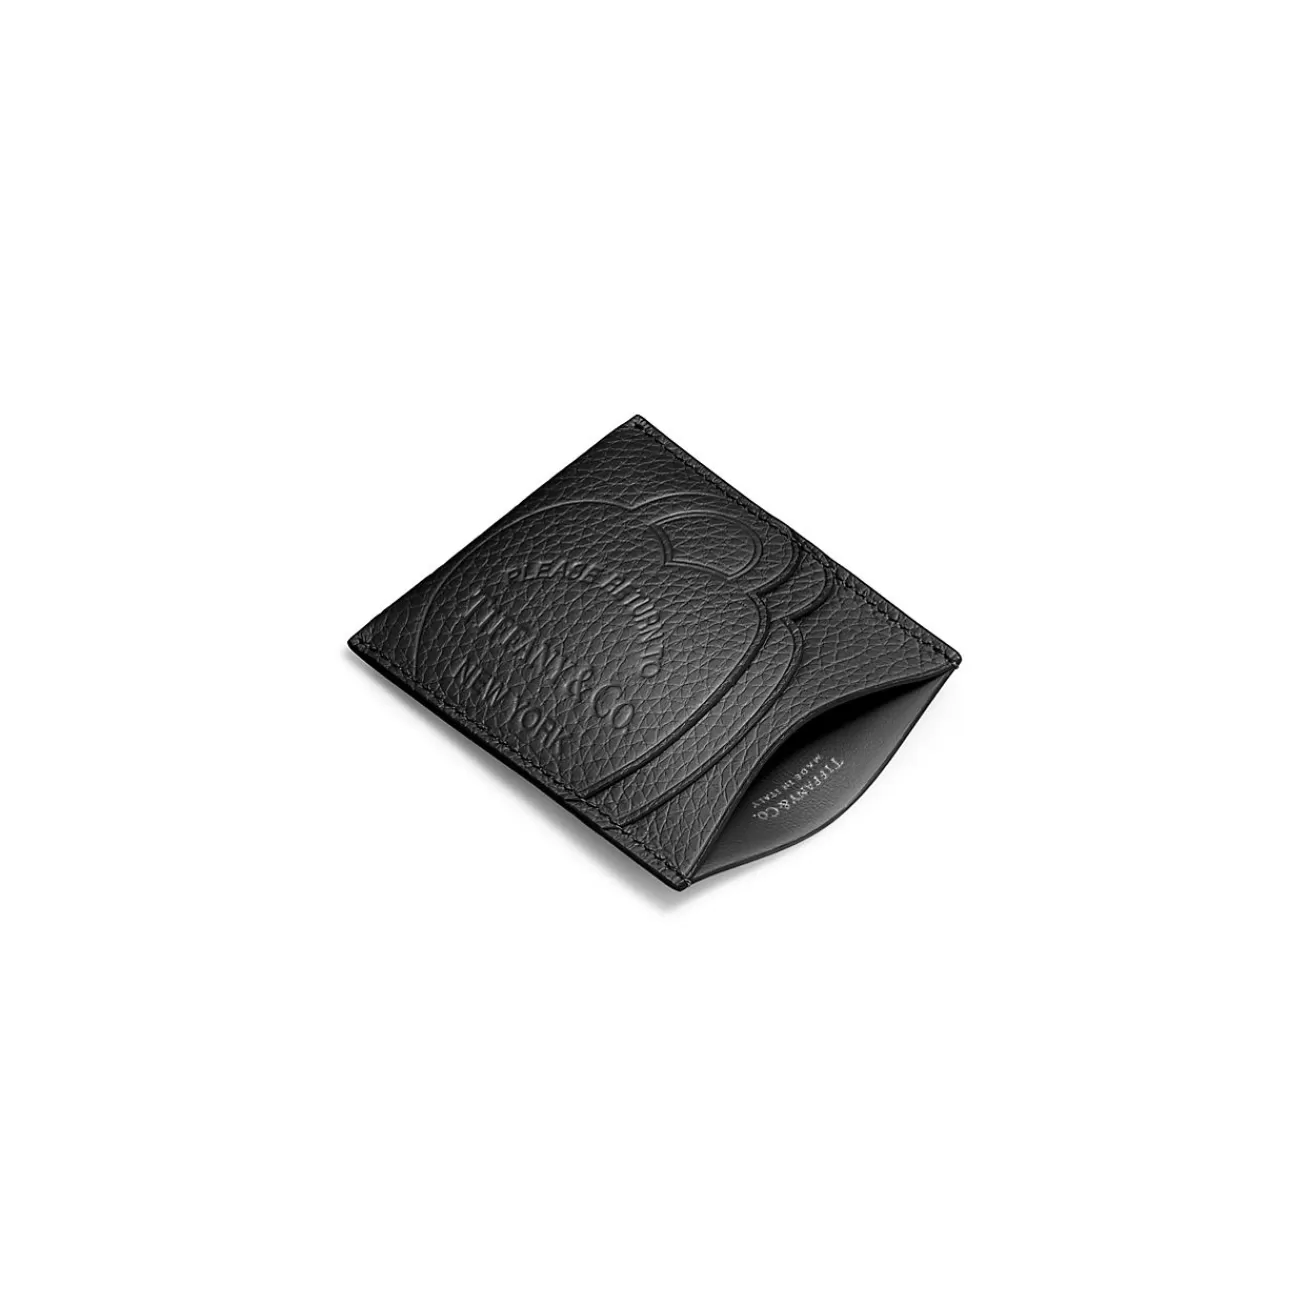 Tiffany & Co. Return to Tiffany® Card Case in Black Leather | ^Women Business Gifts | Small Leather Goods